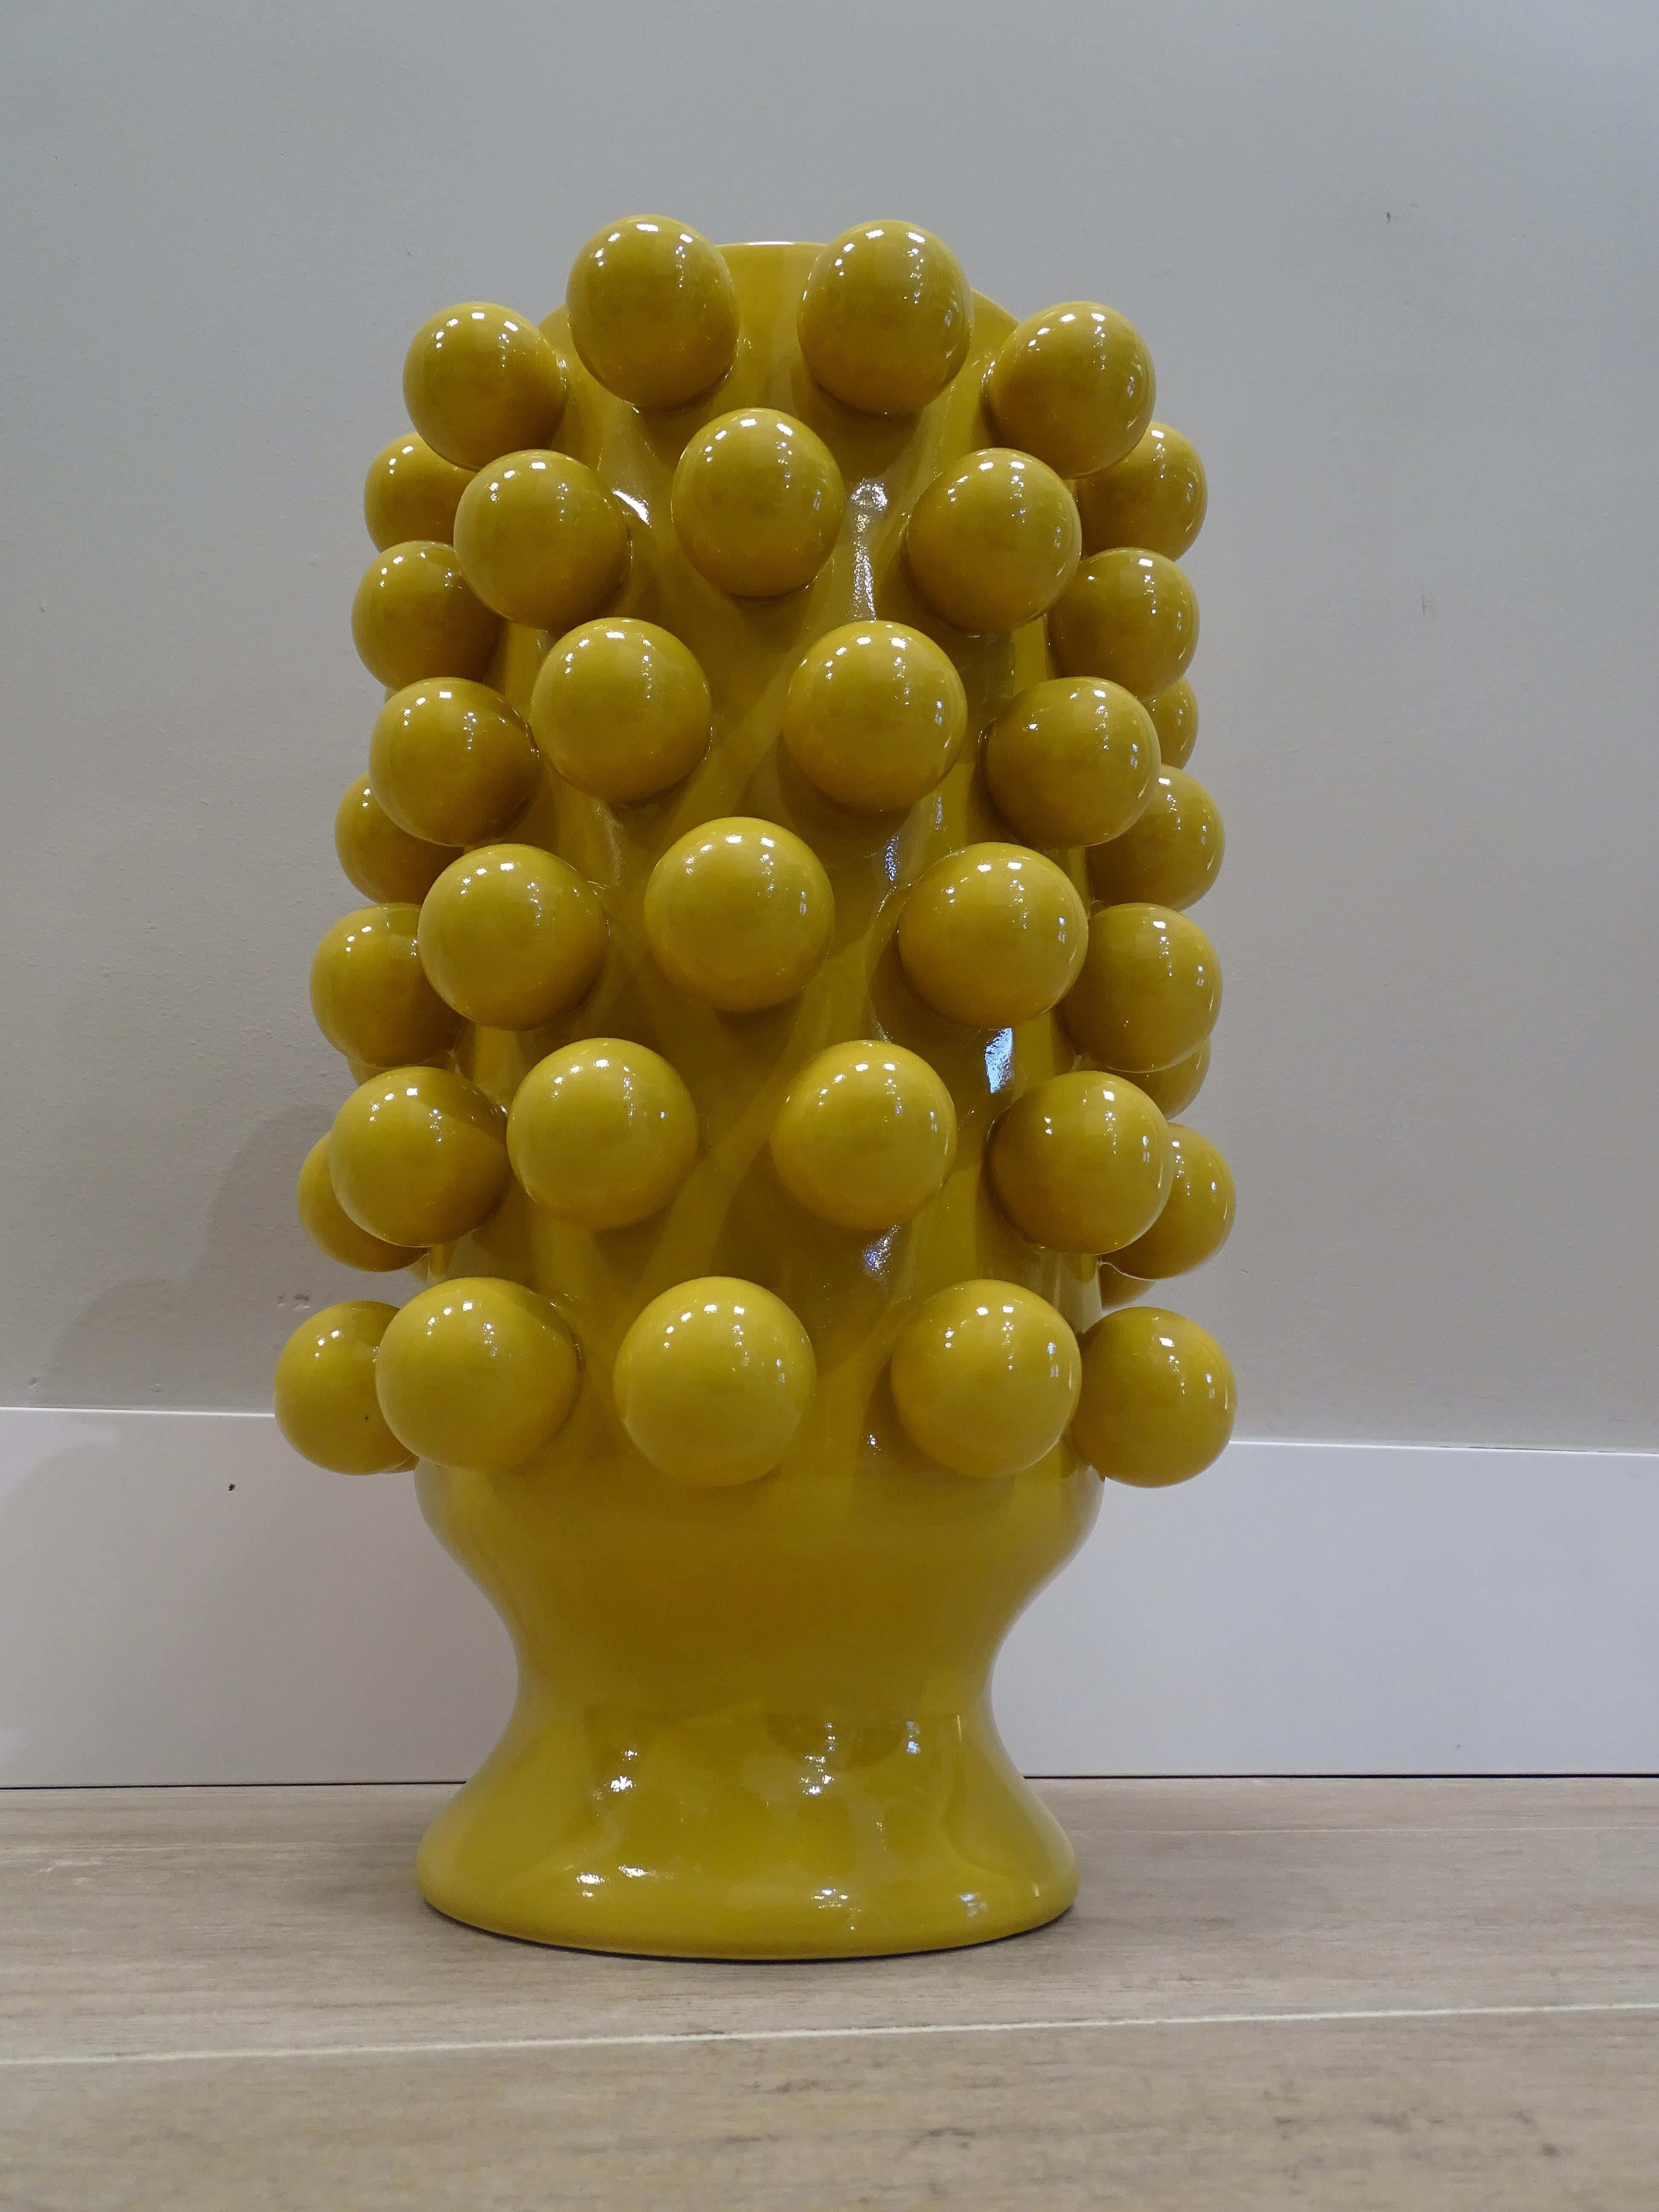 Hand-Crafted French Yellow Ceramic Vase with Balls After Lalique